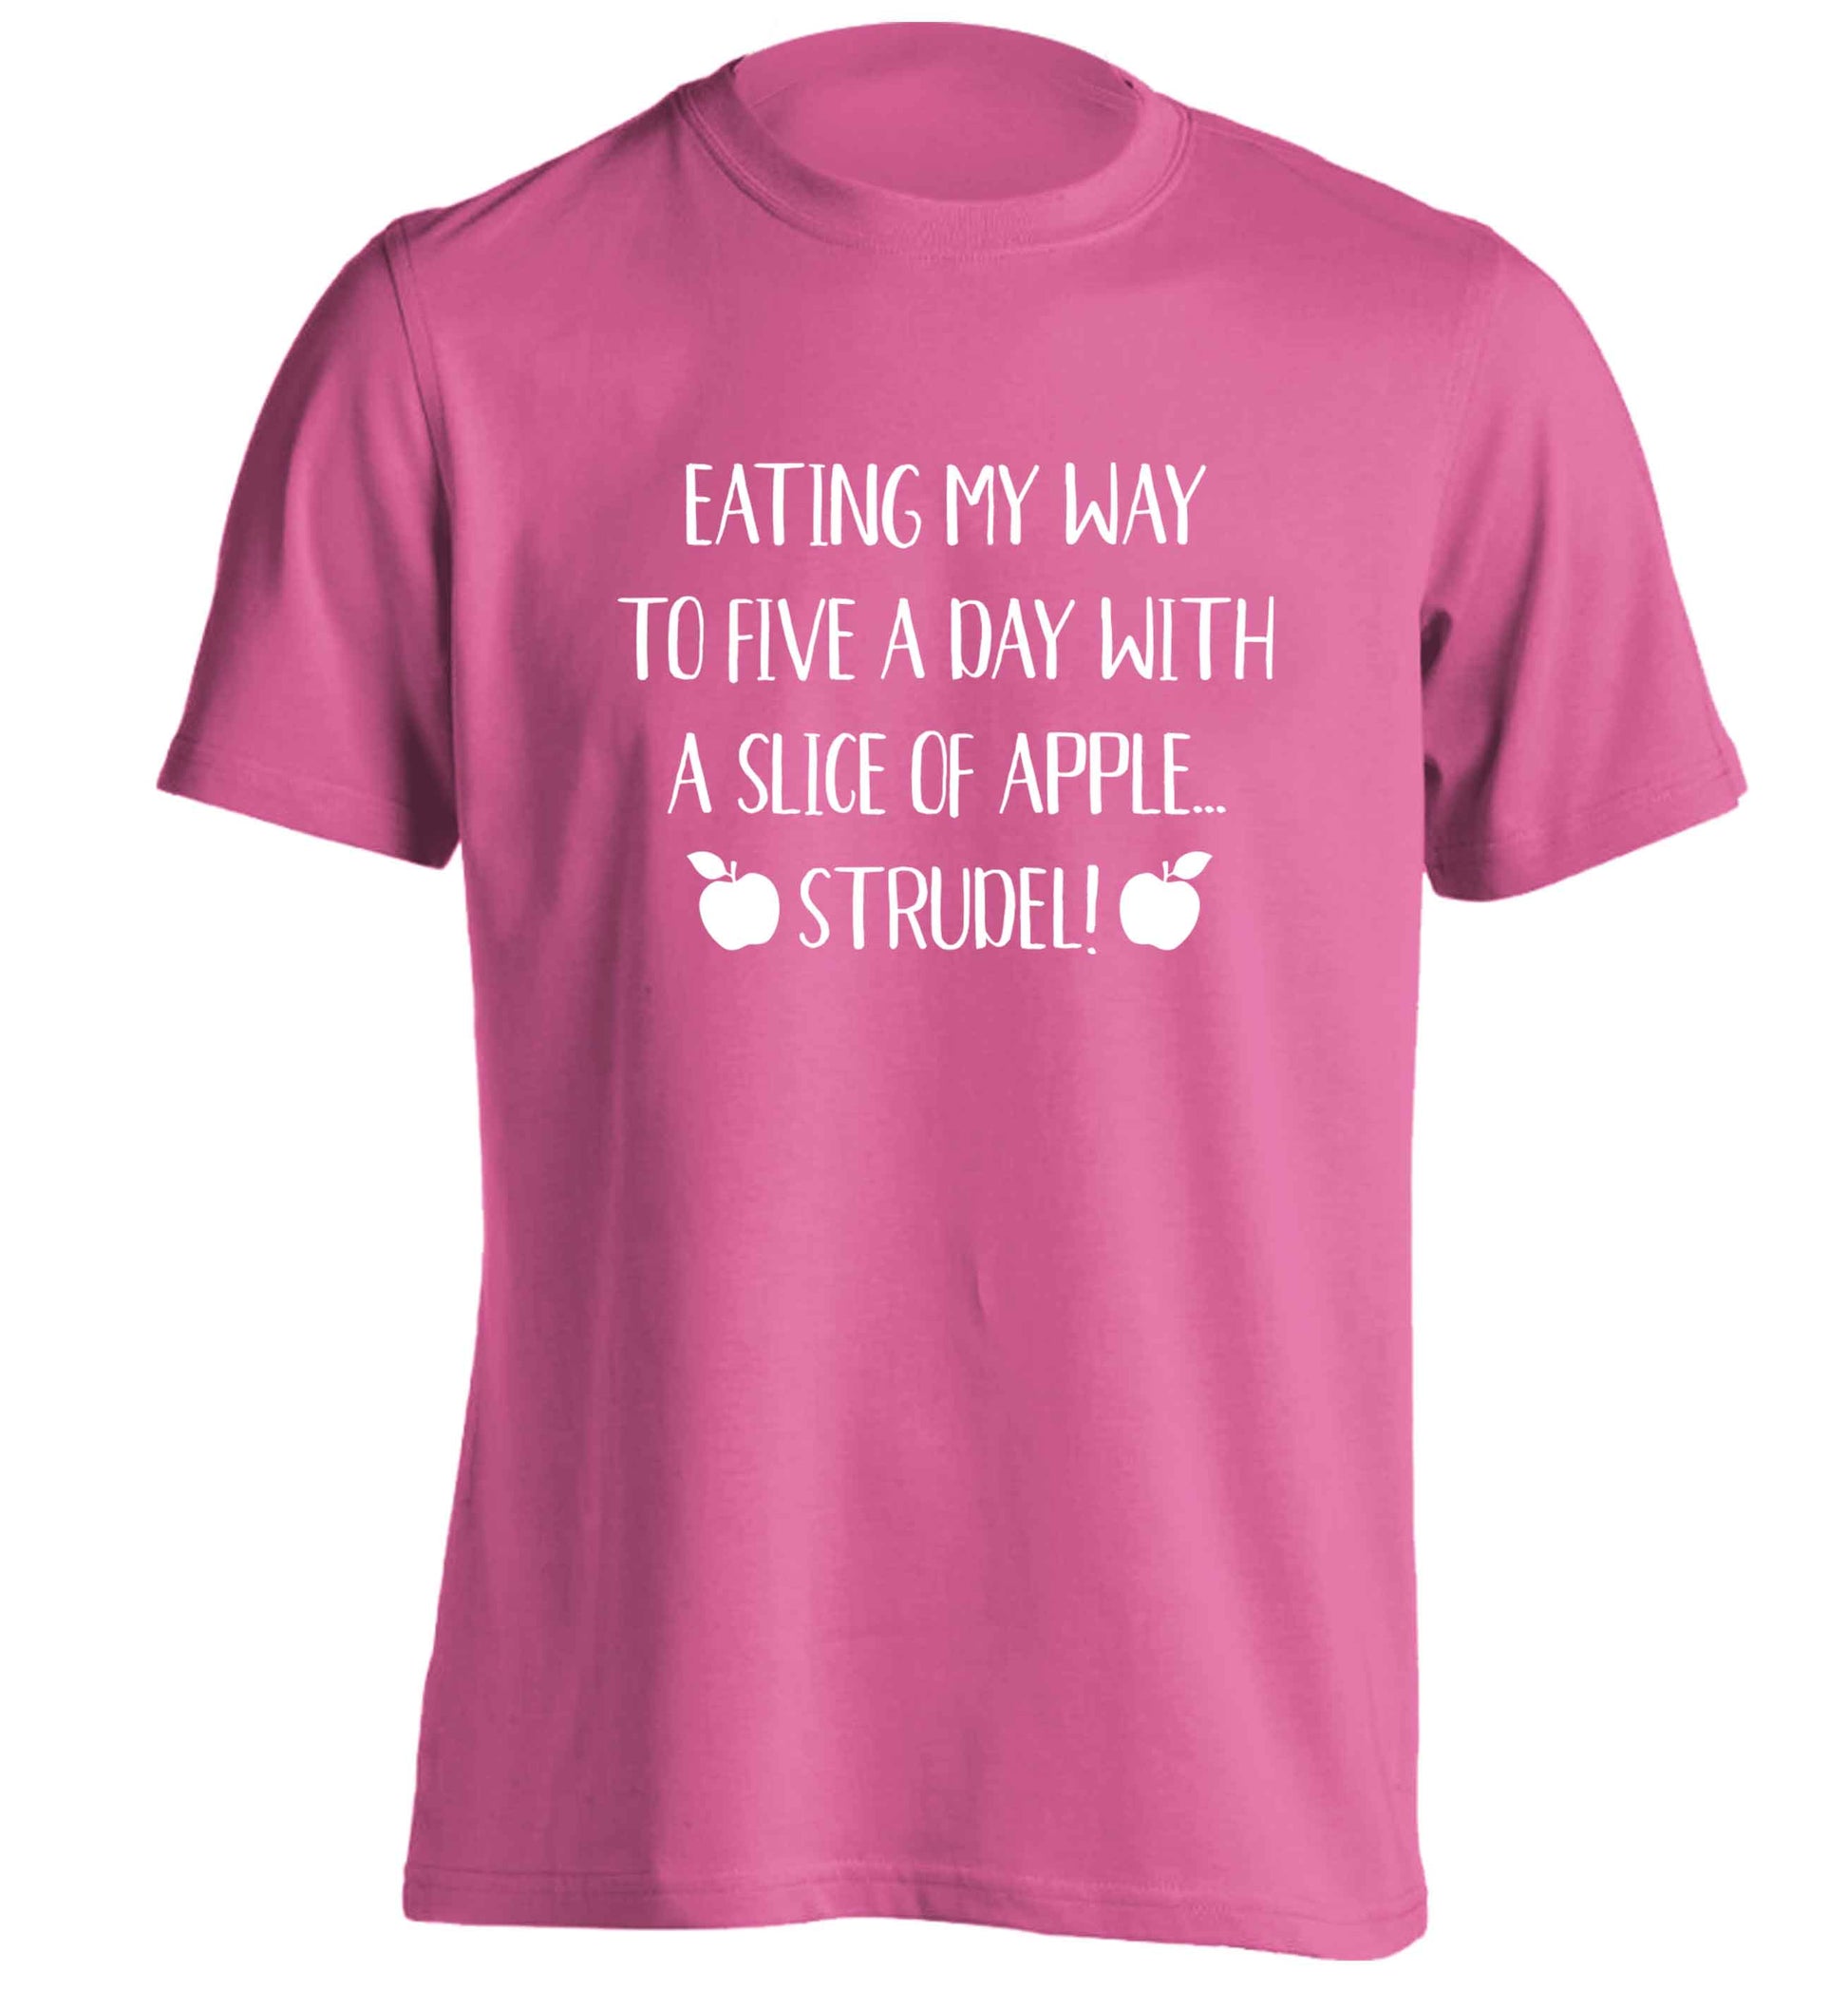 Eating my way to five a day with a slice of apple strudel adults unisex pink Tshirt 2XL